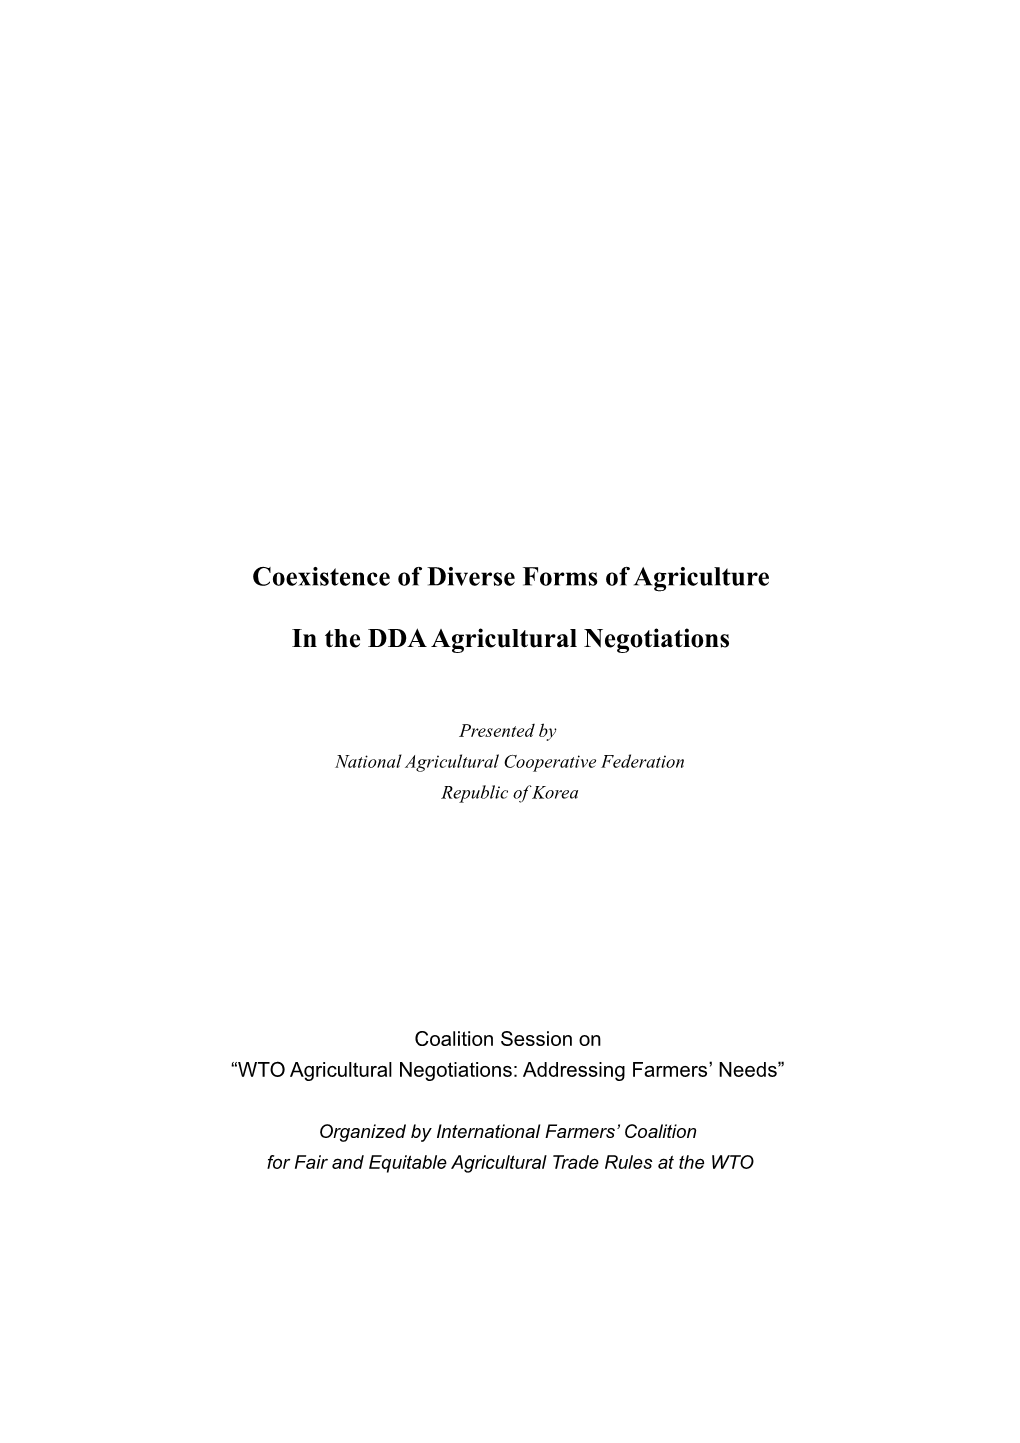 Characteristics Assessment of the Uruguay Round Agreement on Agriculture